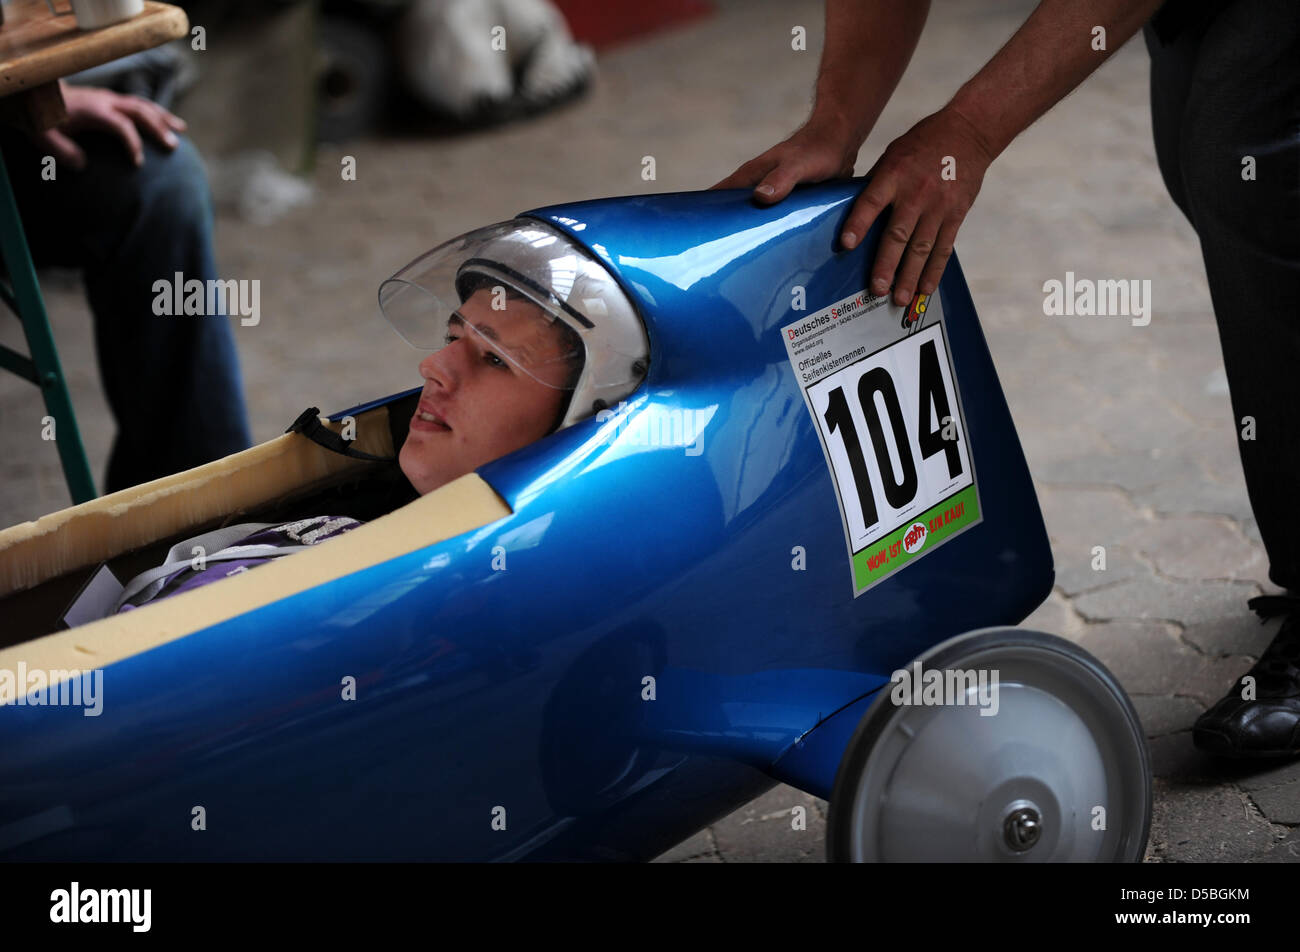 Martin sits in his soapbox racer during the weighing in Holzhausen, Germany, 3 September 2010. The German Soap Box Derby Racer Championship started on 3 September 2010. The main street in Holzhausen will be closed for the race. Photo: Uwe Zucchi Stock Photo